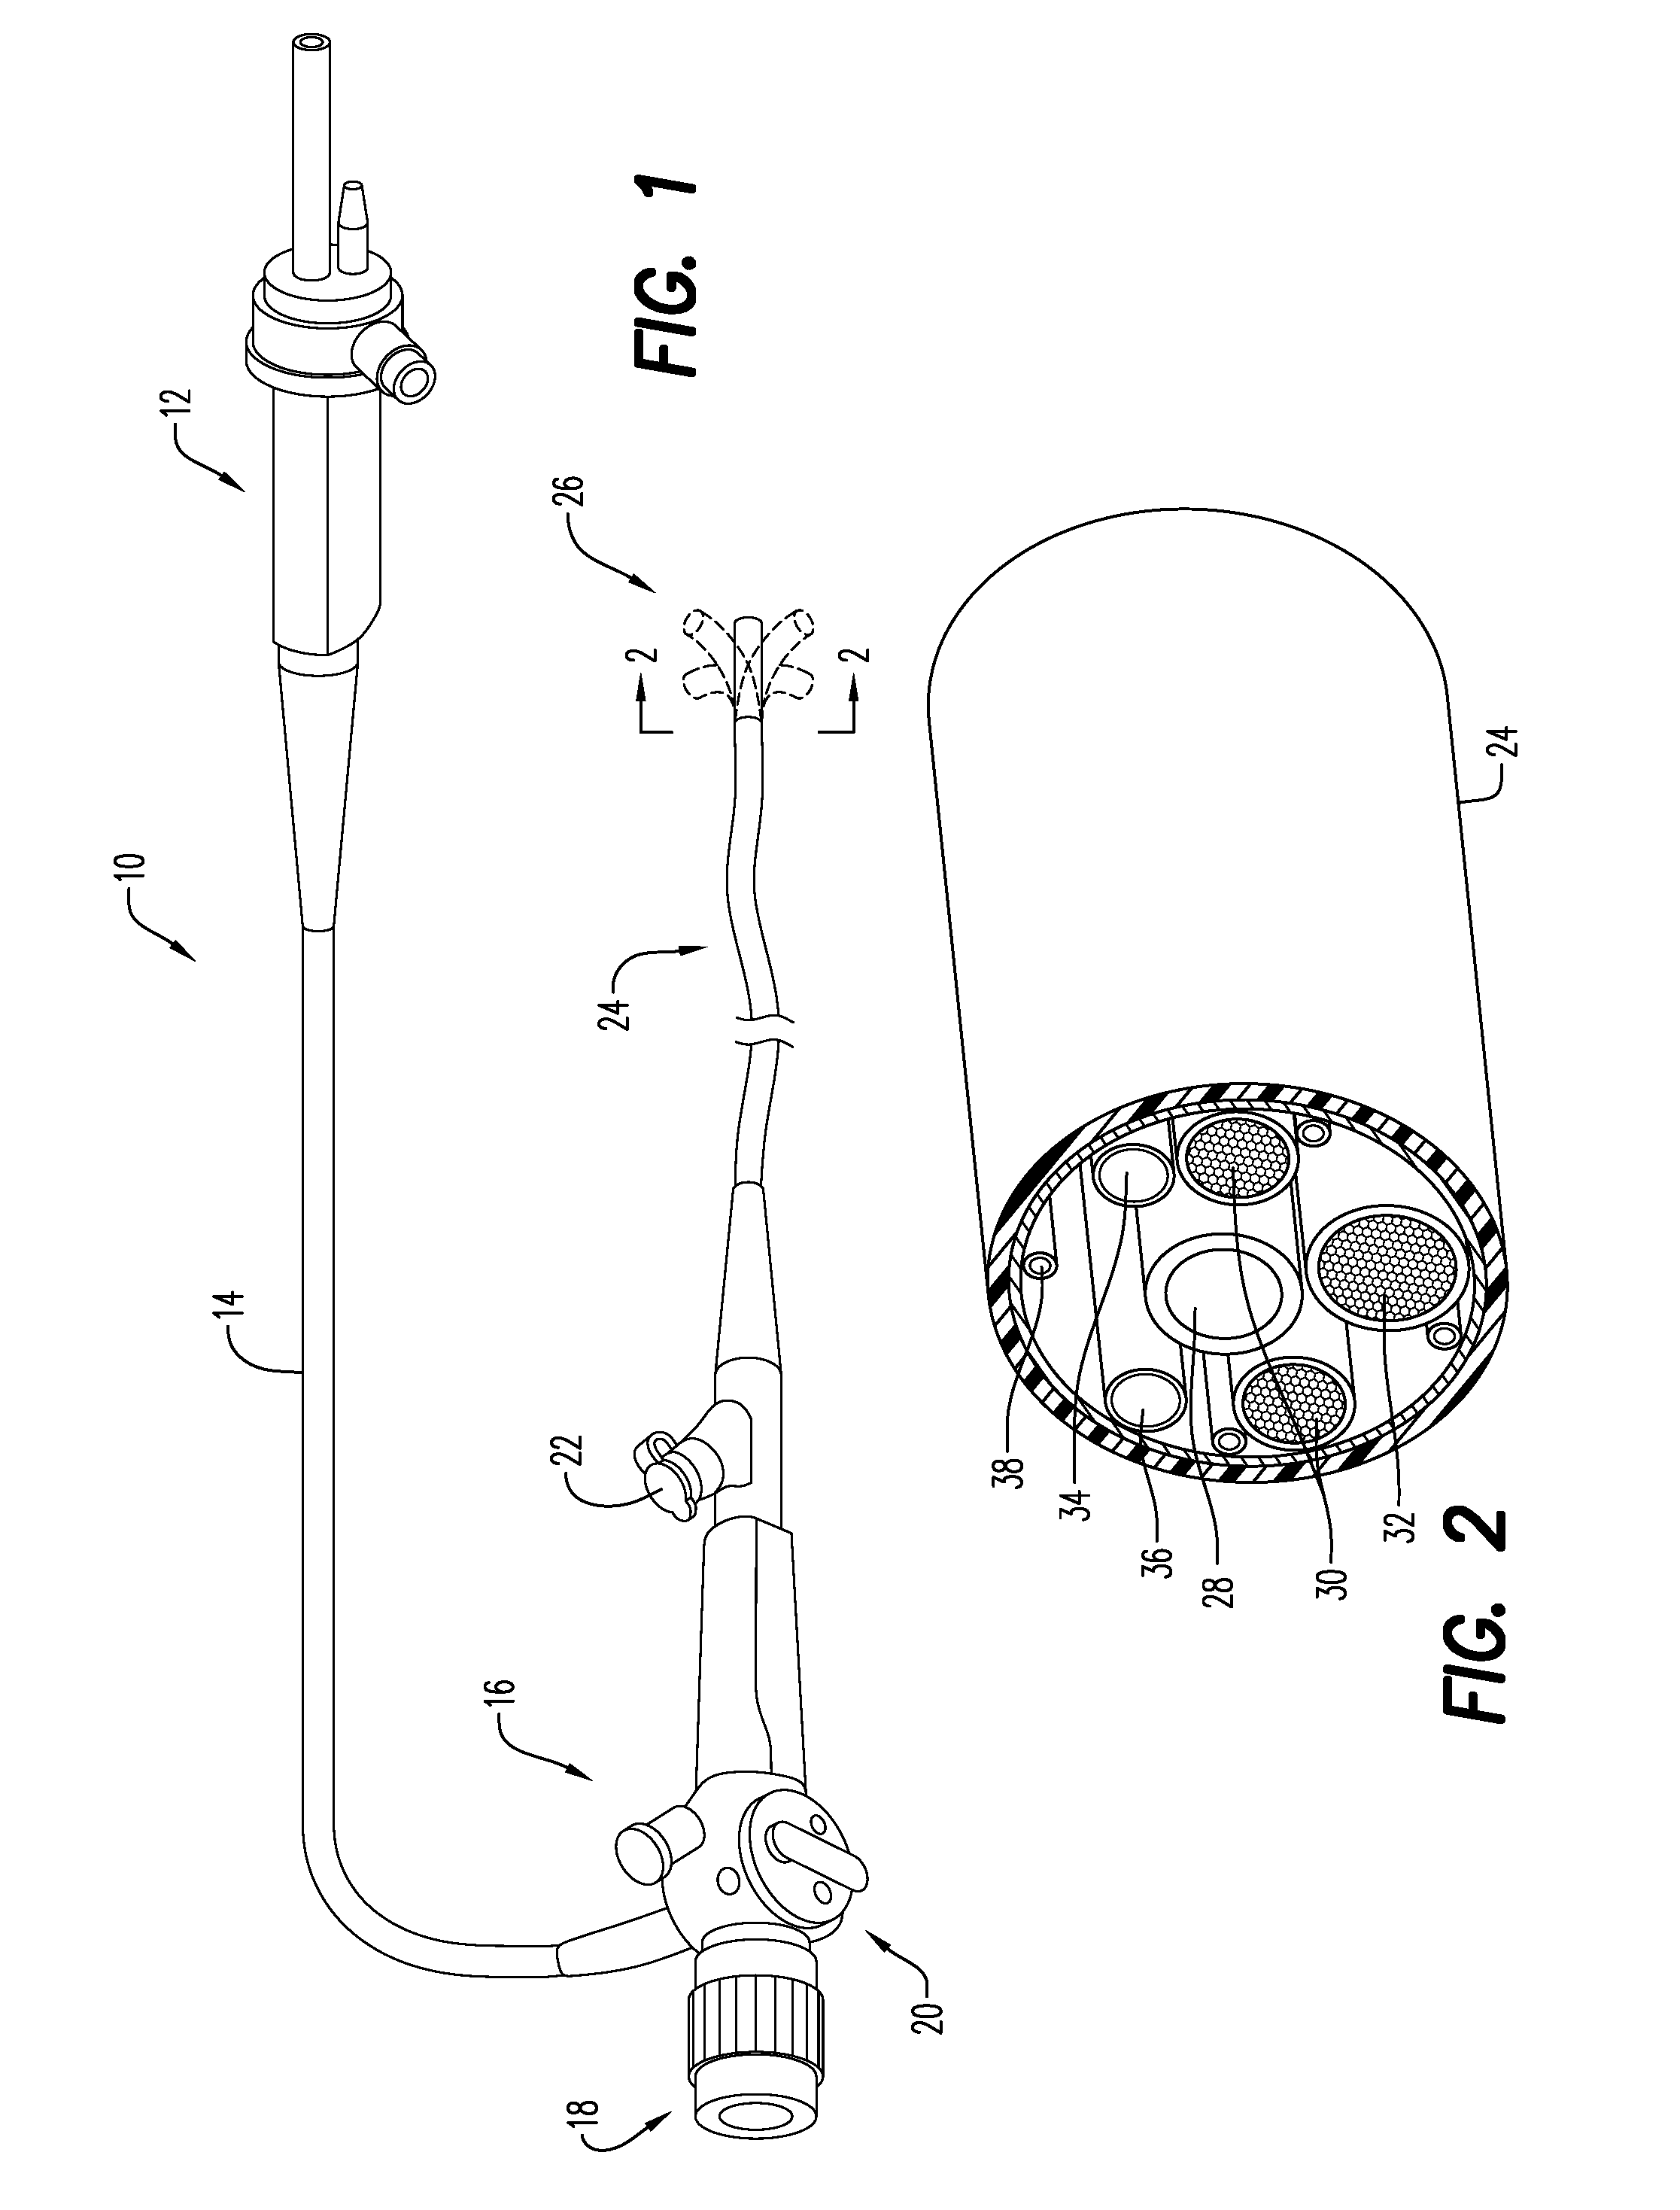 Improved Adaptive Devices and Methods for Endoscopic Wound Closures